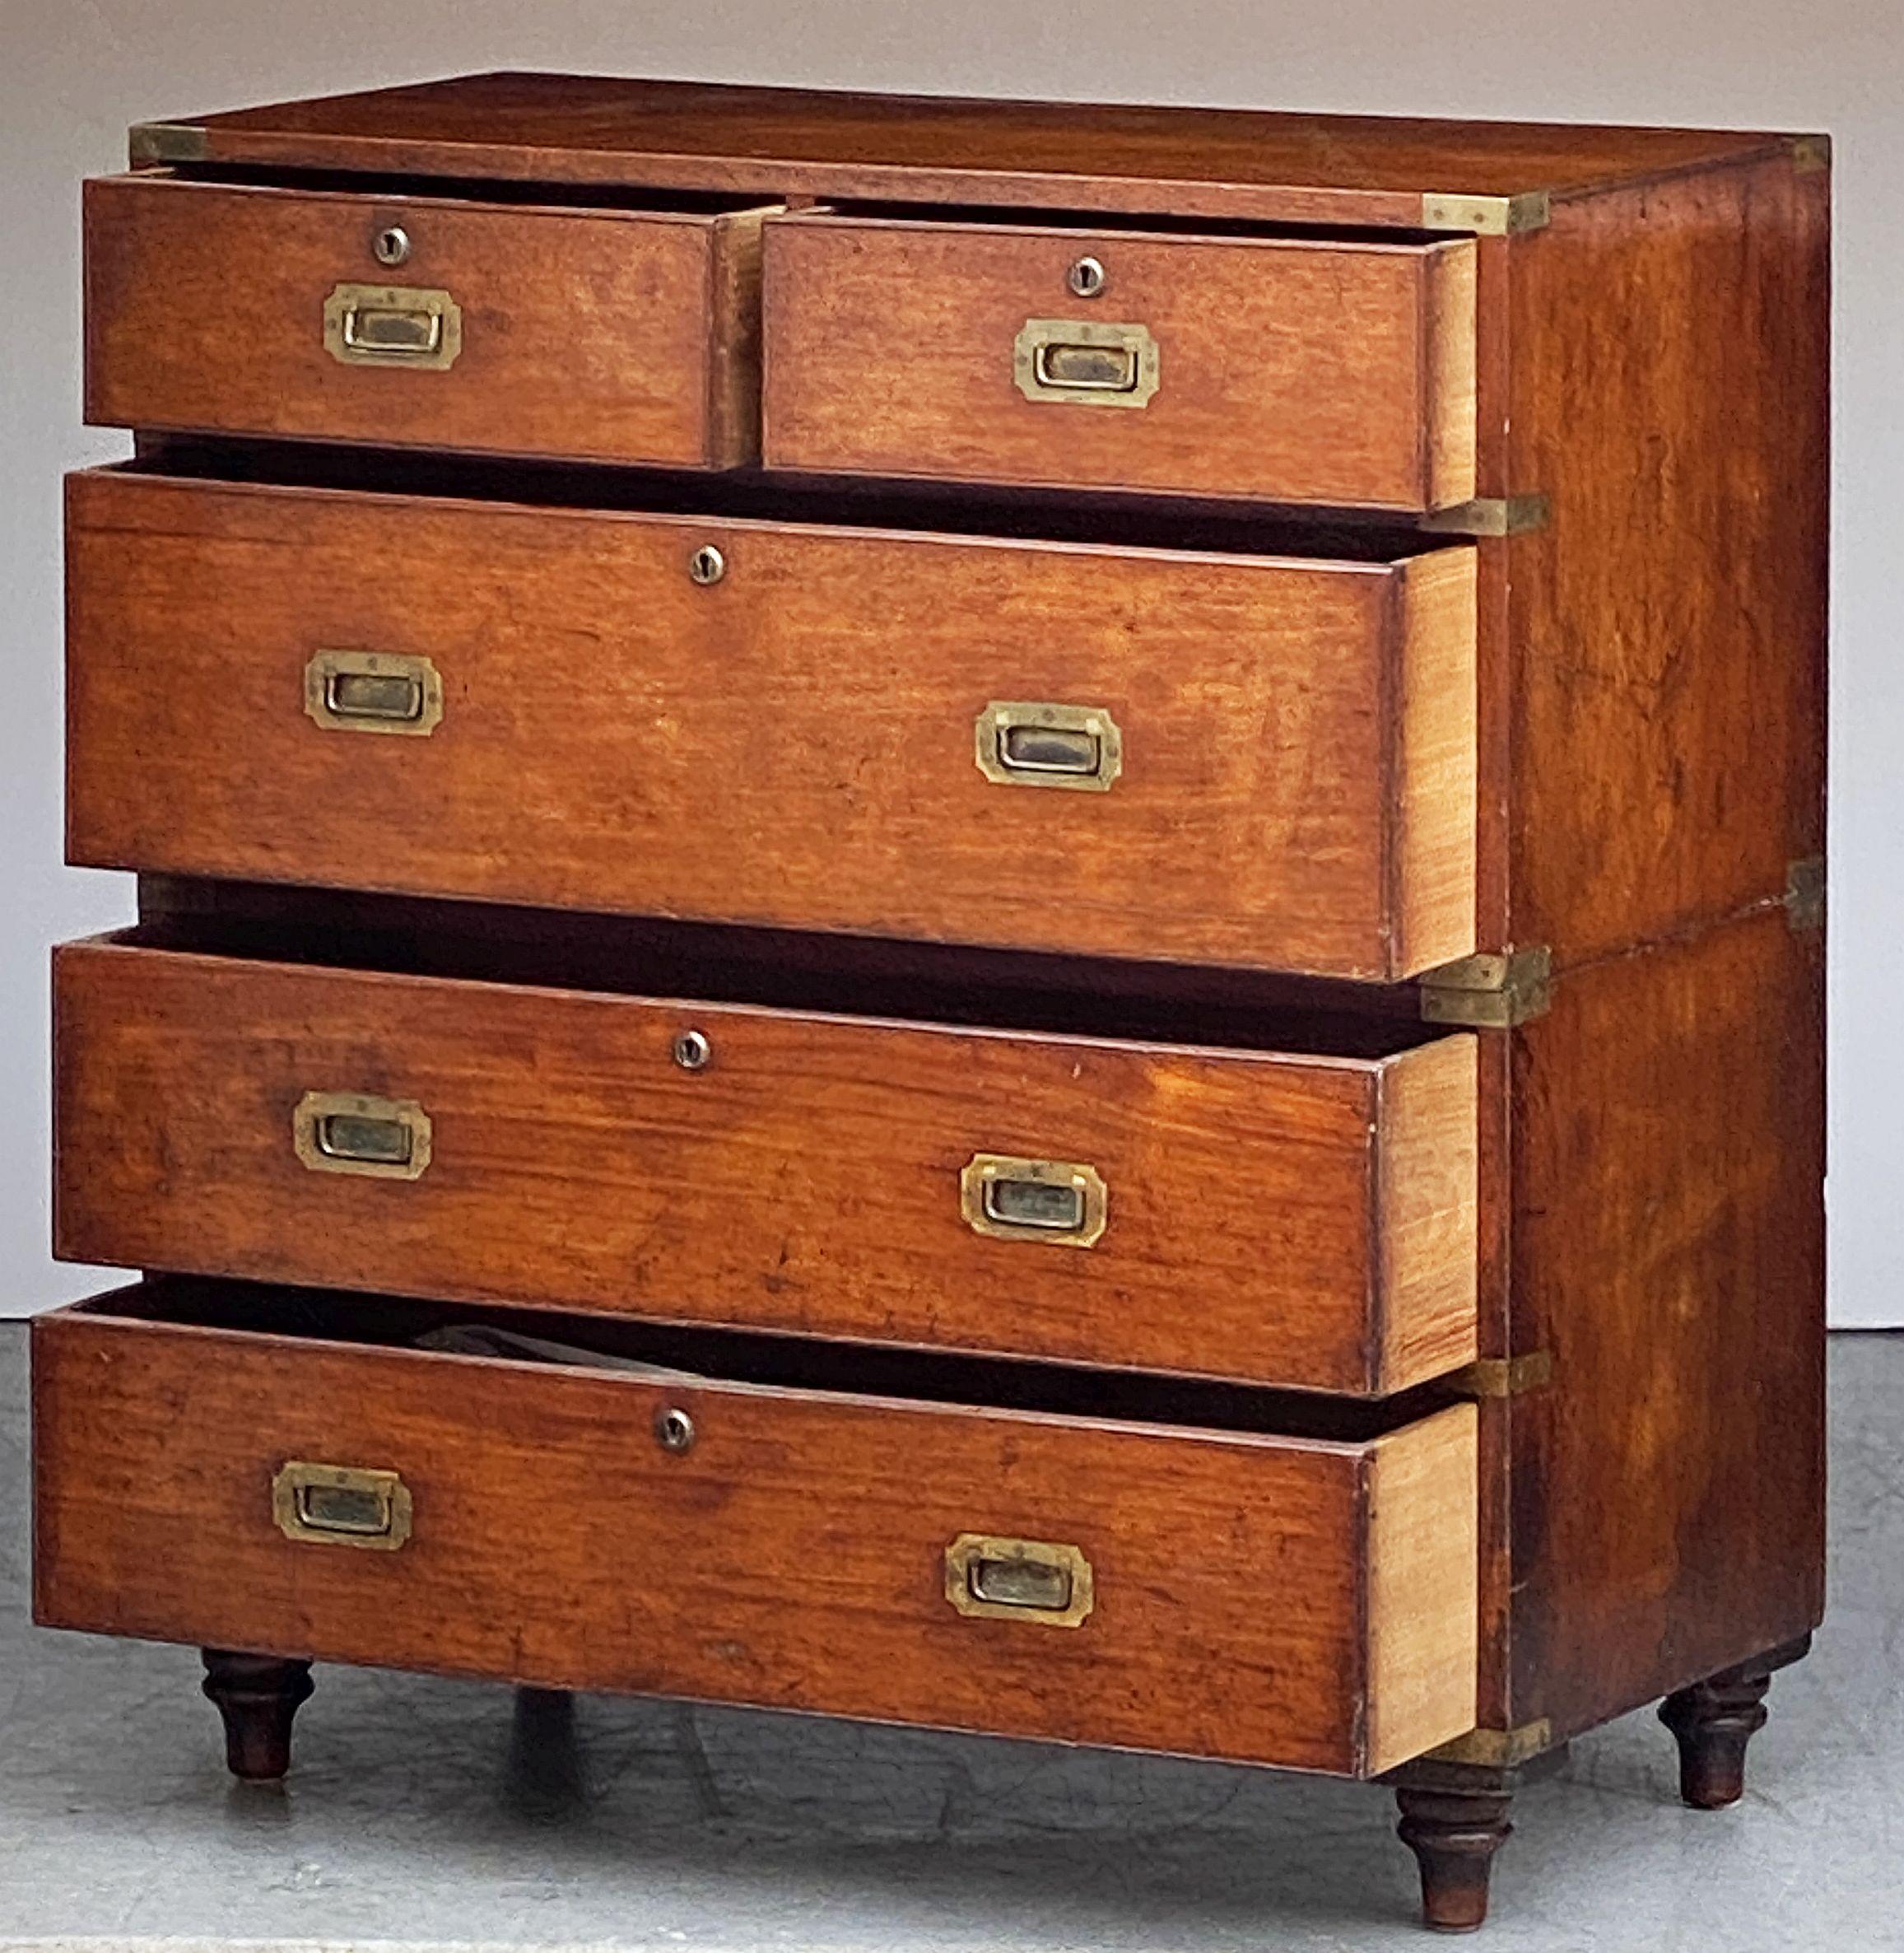 British Military Officer's Campaign Chest or Dresser of Brass-Bound Mahogany For Sale 5